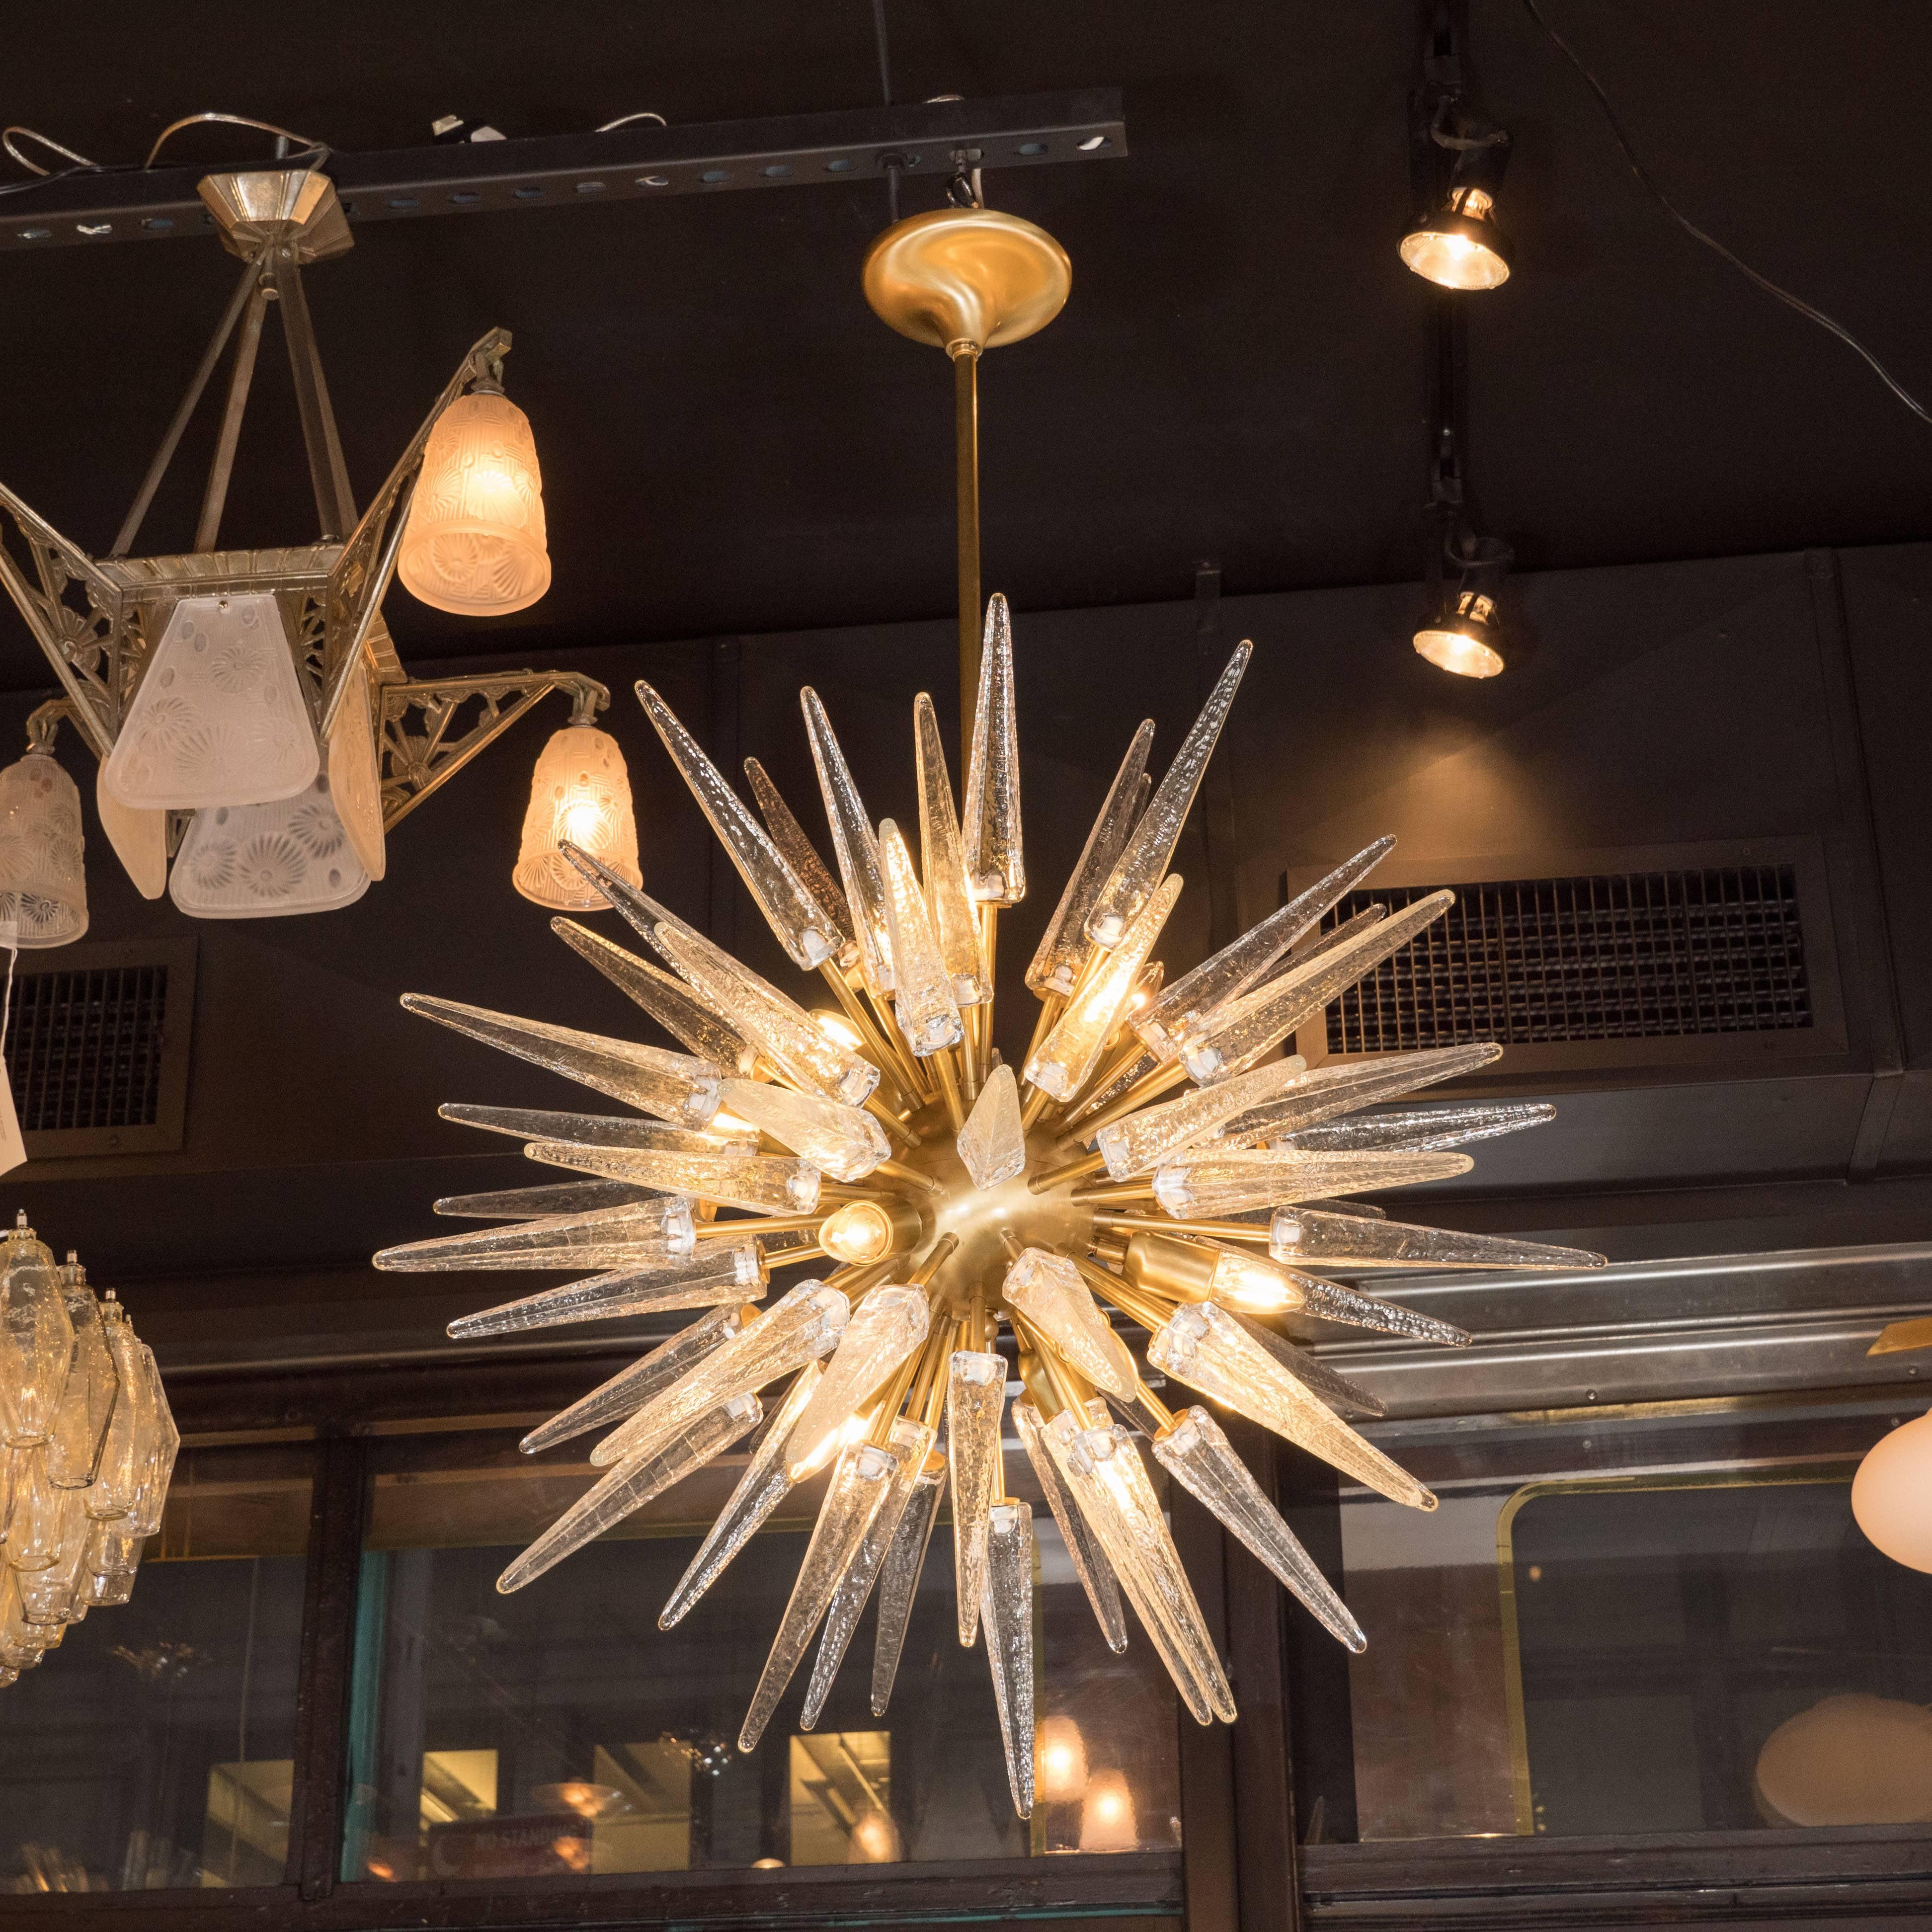 This stunning modernist Sputnik was realized by our custom atelier in Murano, Italy- the islands off the coast of Venice renowned for centuries for their superlative glass production. It features an exploding sunburst form consisting of an abundance